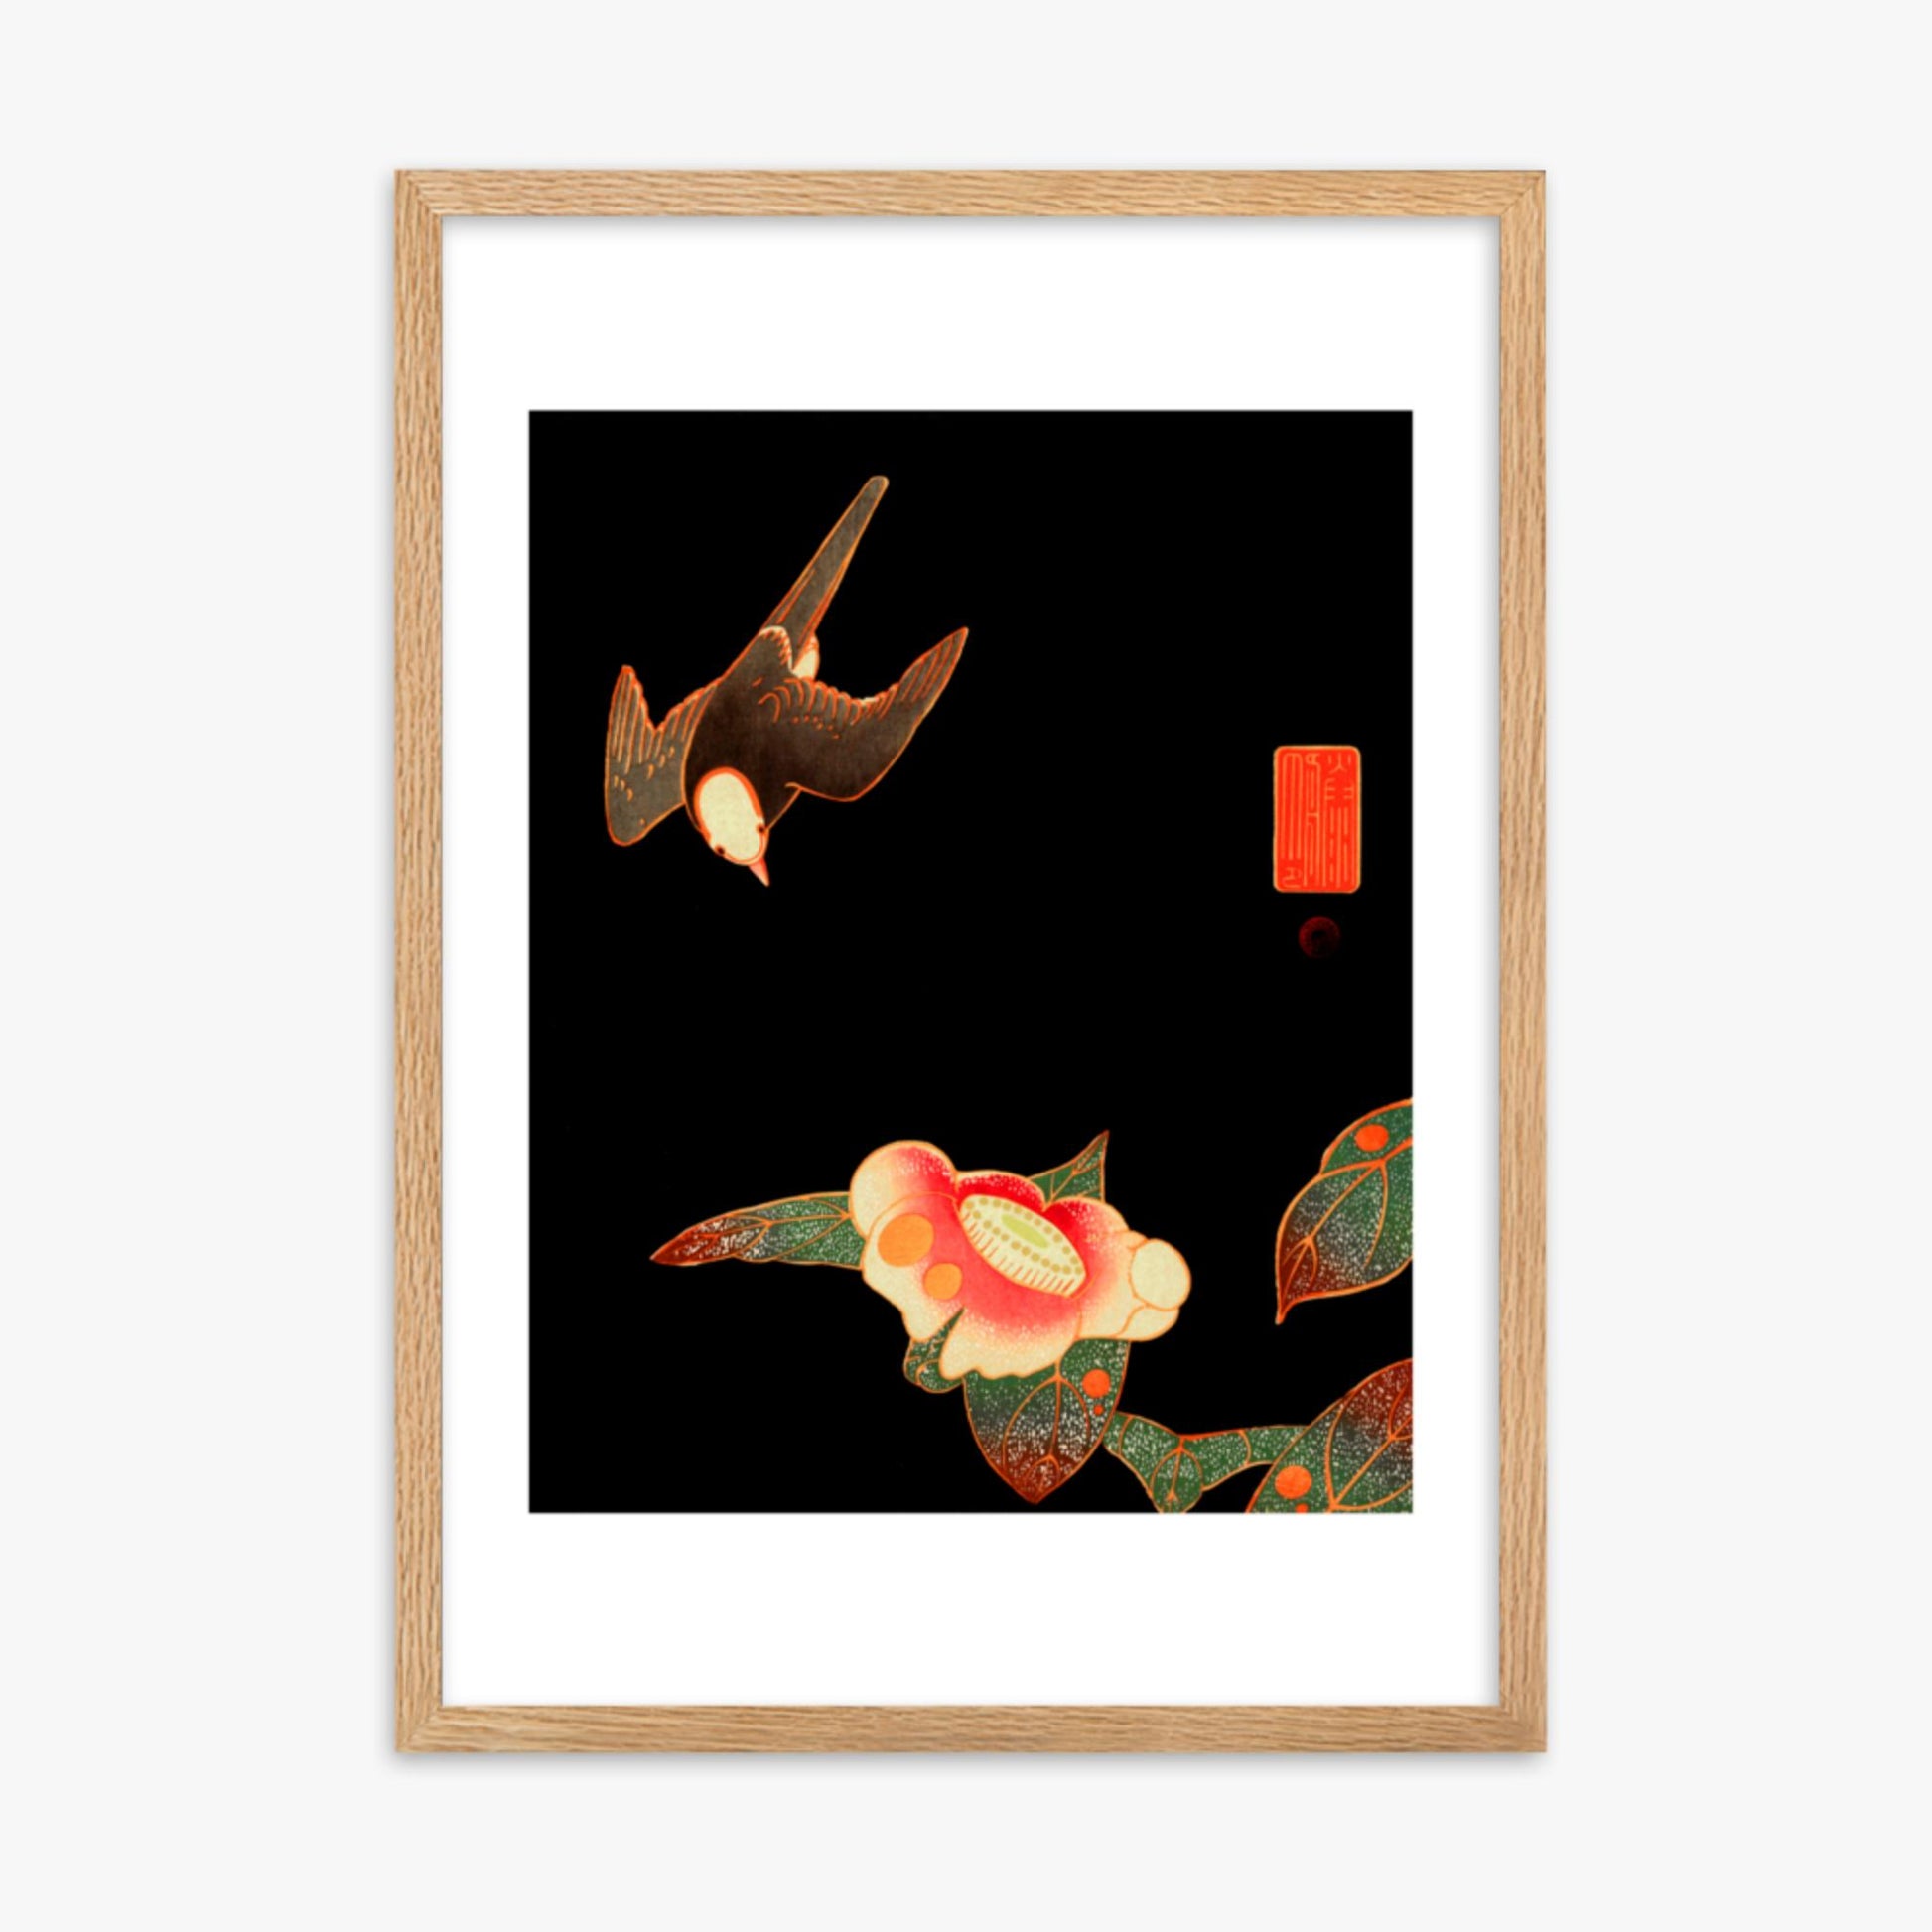 Ito Jakuchu - Swallow and Camellia 50x70 cm Poster With Oak Frame